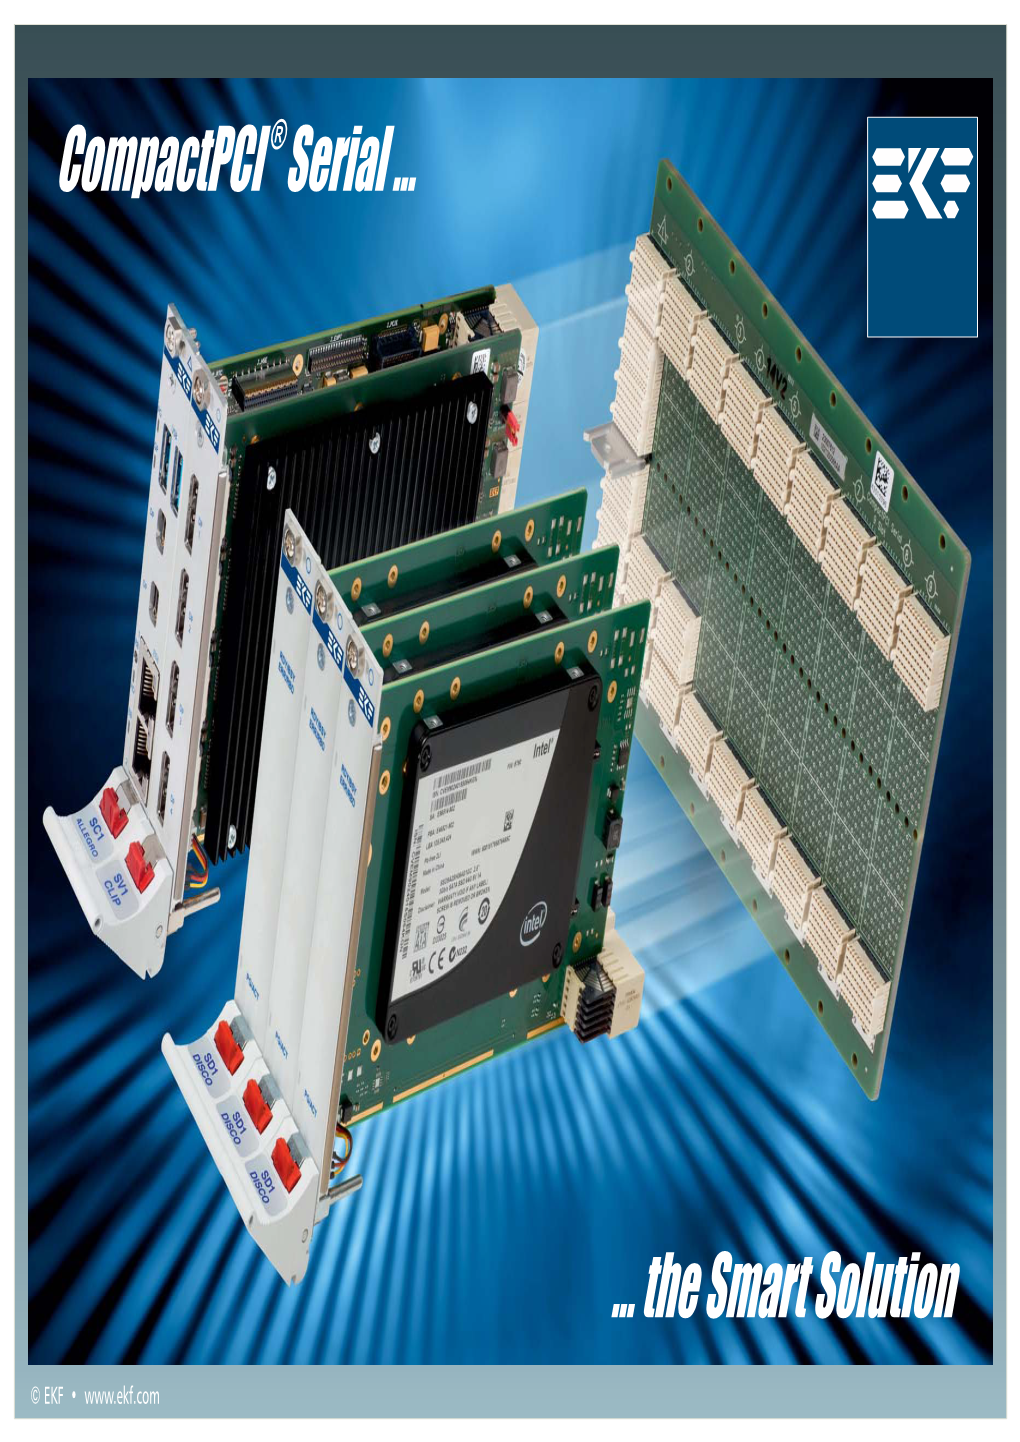 Compactpci Serial ...The Smart Solution